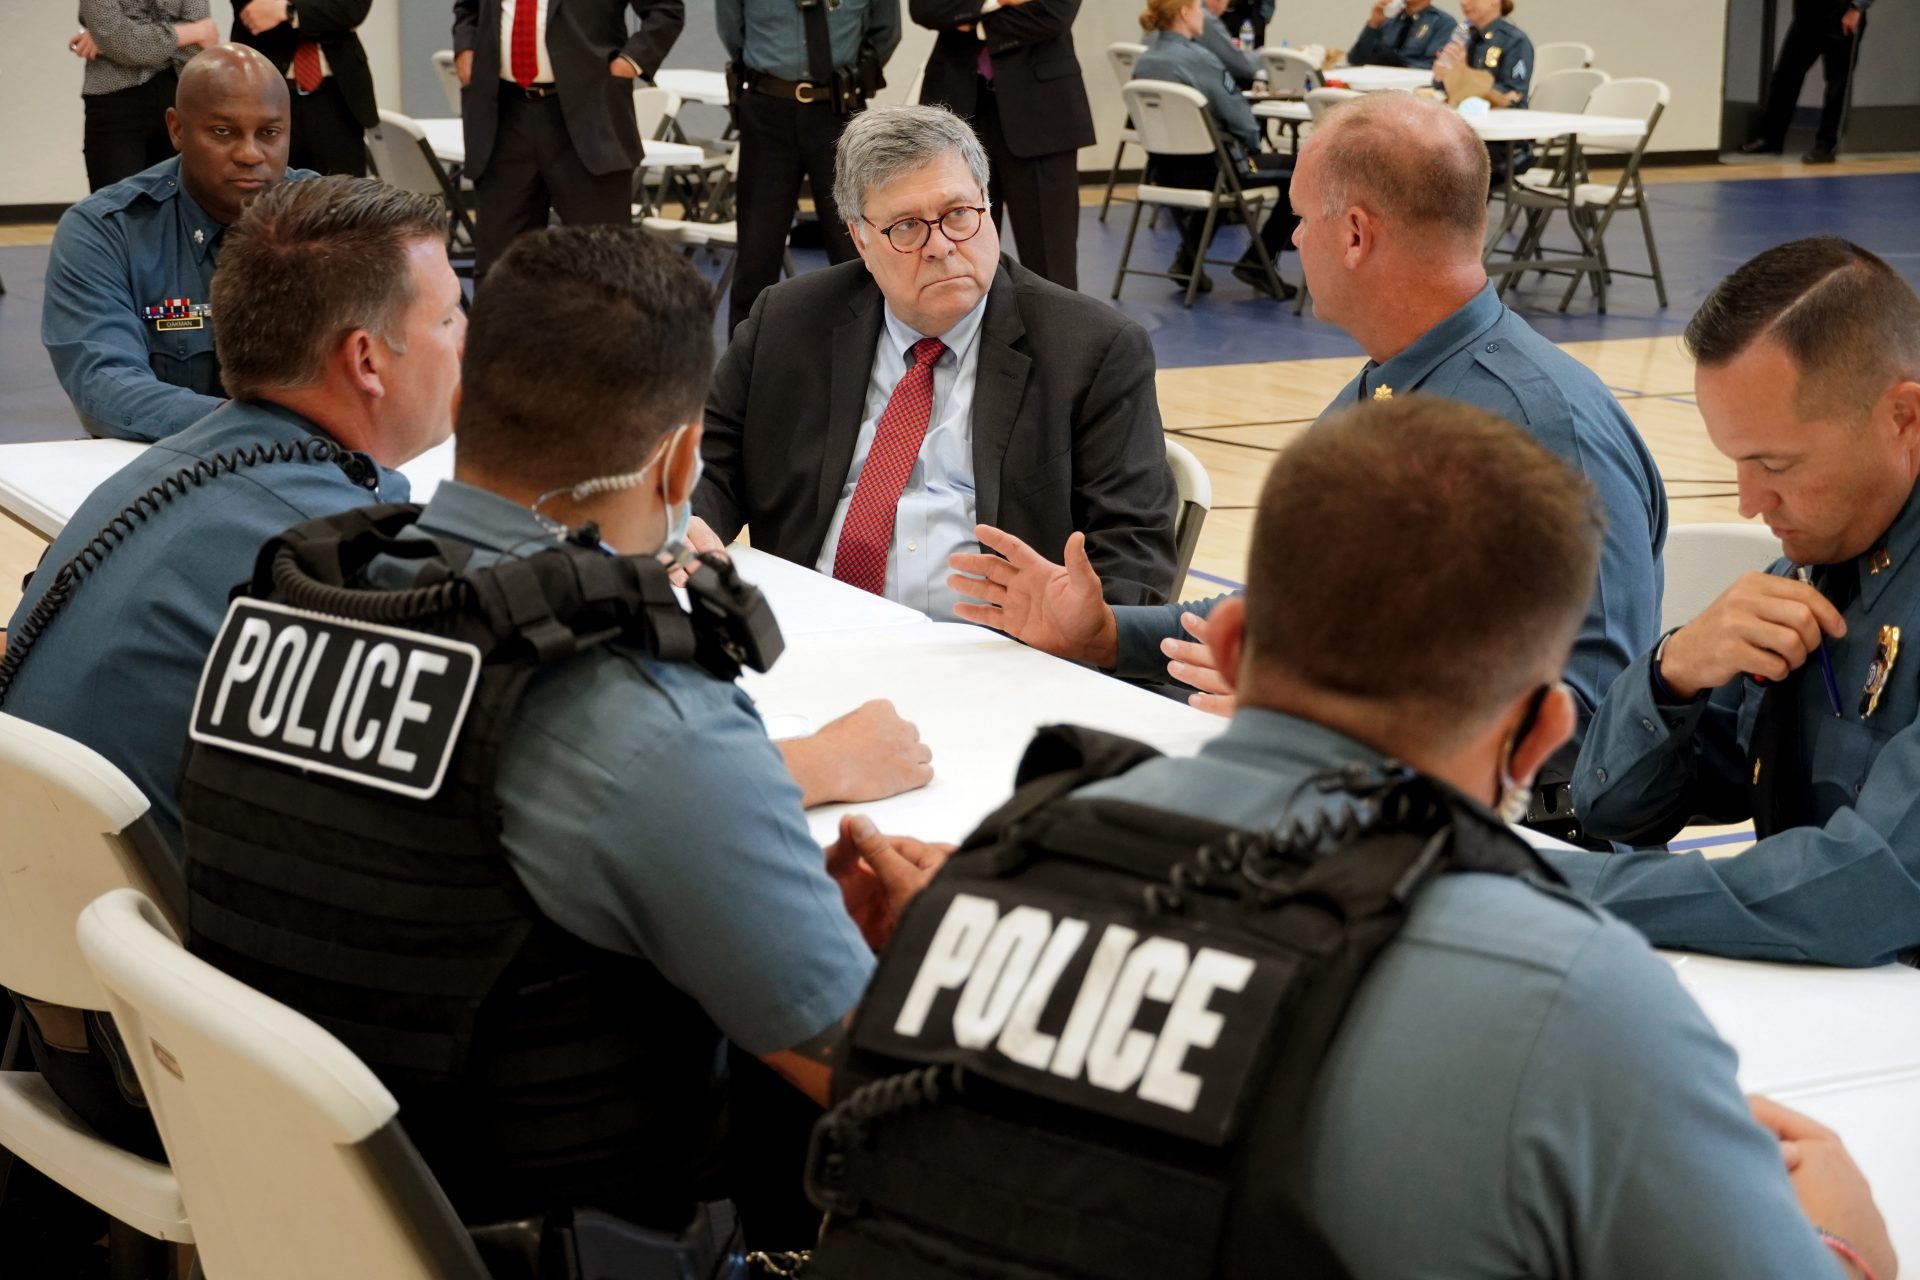 In this Aug. 19, 2020, photo Attorney General William Barr participates in a roll call with police officers from the Kansas City Police Department in Kansas City, Mo. In a private conference call this week with his U.S. attorneys nationwide, Attorney General William Barr said he wanted prosecutors to be aggressive in charging demonstrators who cause violence.